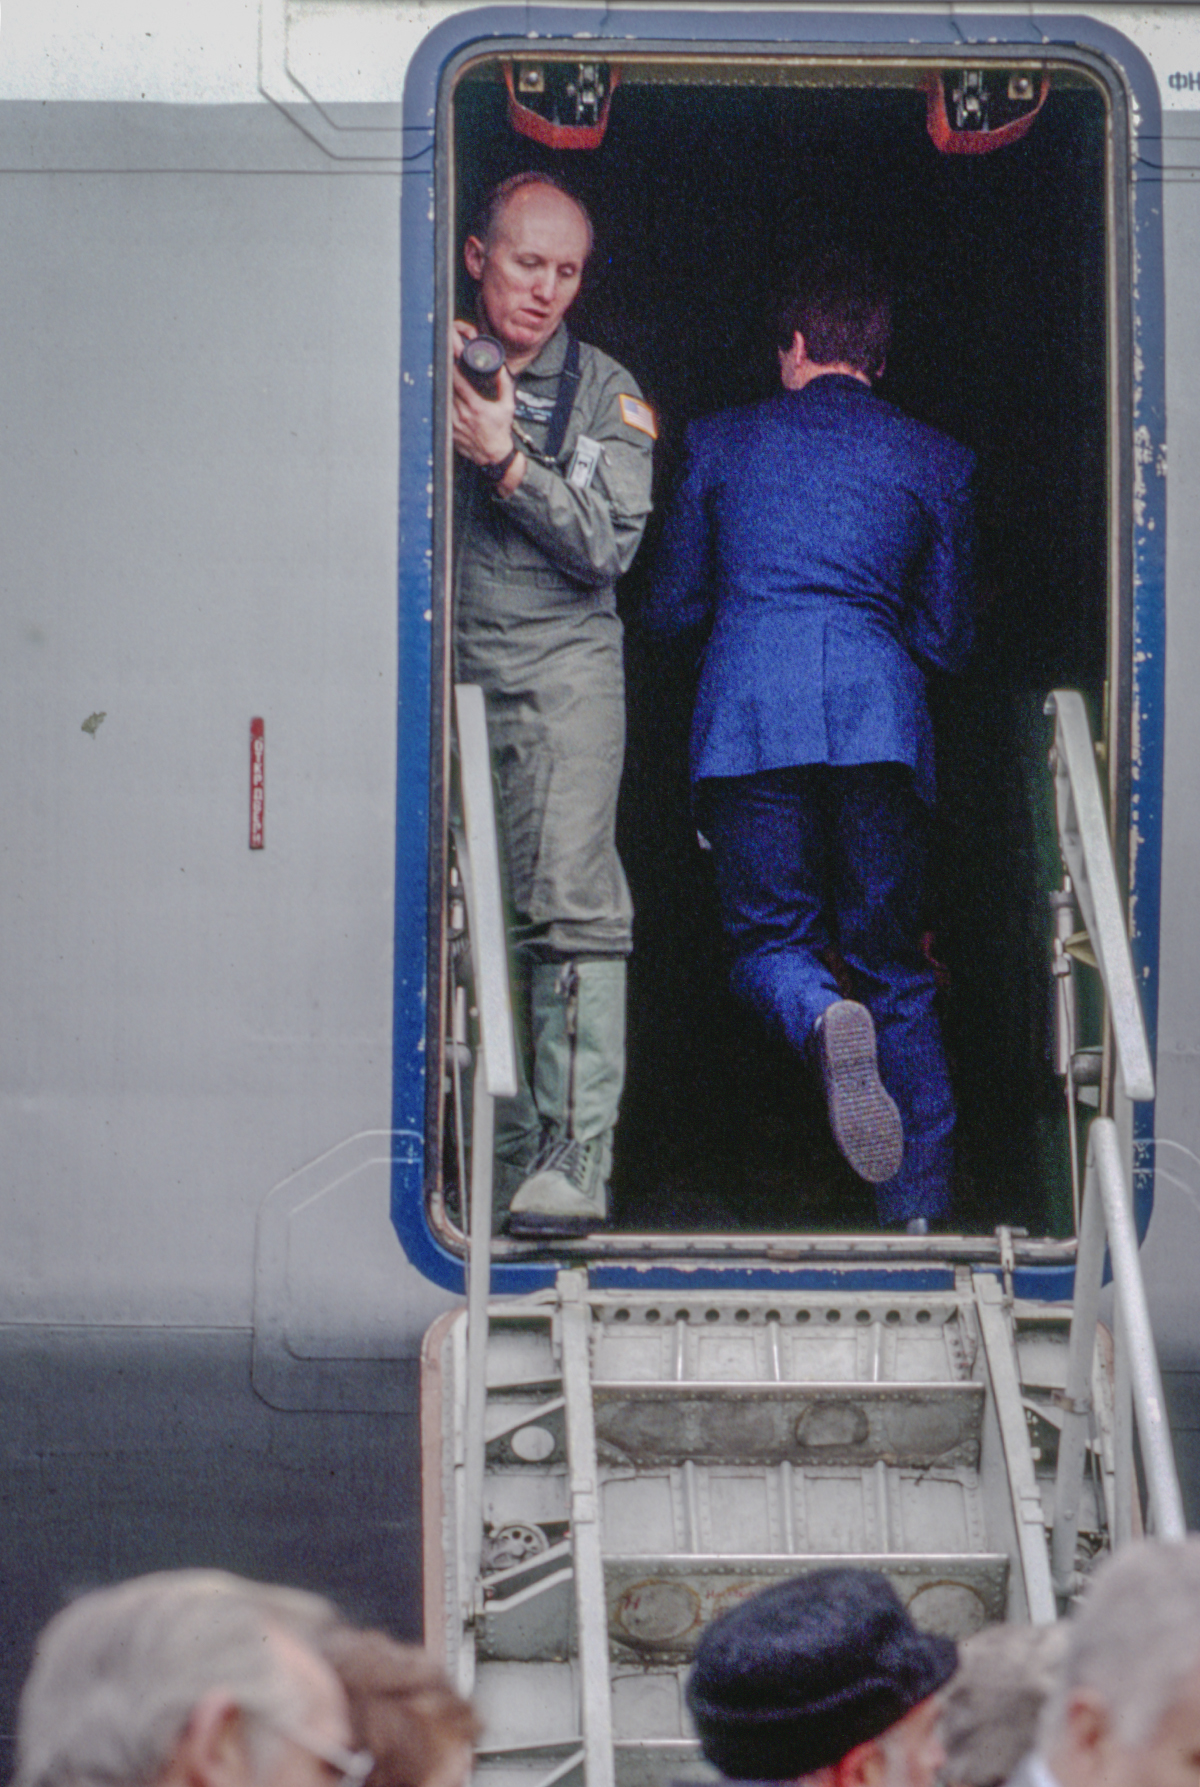 Blast From The Past  Fall-Winter 1992  In this photograph Im standing in the doorway of a Russian Antonov AN-124 aircraft (then considered the largest cargo aircraft in Russias fleet), covering a humanitarian relief operation called Provide Hope. I was the photo editor for part of this operation covering operations between Italy and Russia. While much of the time I was reviewing and editing the photography shot my colleagues I was able to get out and cover some of the operations myself. 
On this mission we flew on the 124 into Moscow where I spent a couple days covering food distribution to orphanages, hospitals and other locations in outlying areas. 

According to Wikipedia: "Provide Hope" was a humanitarian operation conducted by the U.S. Air Force to provide medical equipment and food to former Soviet republics during their transition to capitalism.

Sixty-five C-5 and C-141 missions flew 2,363 short tons (2,144 t) of food and medical supplies to 24 locations in the Commonwealth of Independent States during the initial launch. Much of these supplies was left over from the buildup to the Persian Gulf War.

For nearly two weeks, US Air Force C-5As and C-141s delivered several hundred tons of emergency food, medicines, and medical supplies to all twelve new independent states of the former Soviet Union, not only to each capital city but also to several outlying cities, especially across Russia. 

Small teams of US personnel from various government agencies (On-Site Inspection Agency, USAID, and USDA) had been placed in each destination shortly before the deliveries, to coordinate with local officials and to monitor to the best extent possible that the deliveries reached the intended recipients (i.e., orphanages, hospitals, soup kitchens, and needy families).